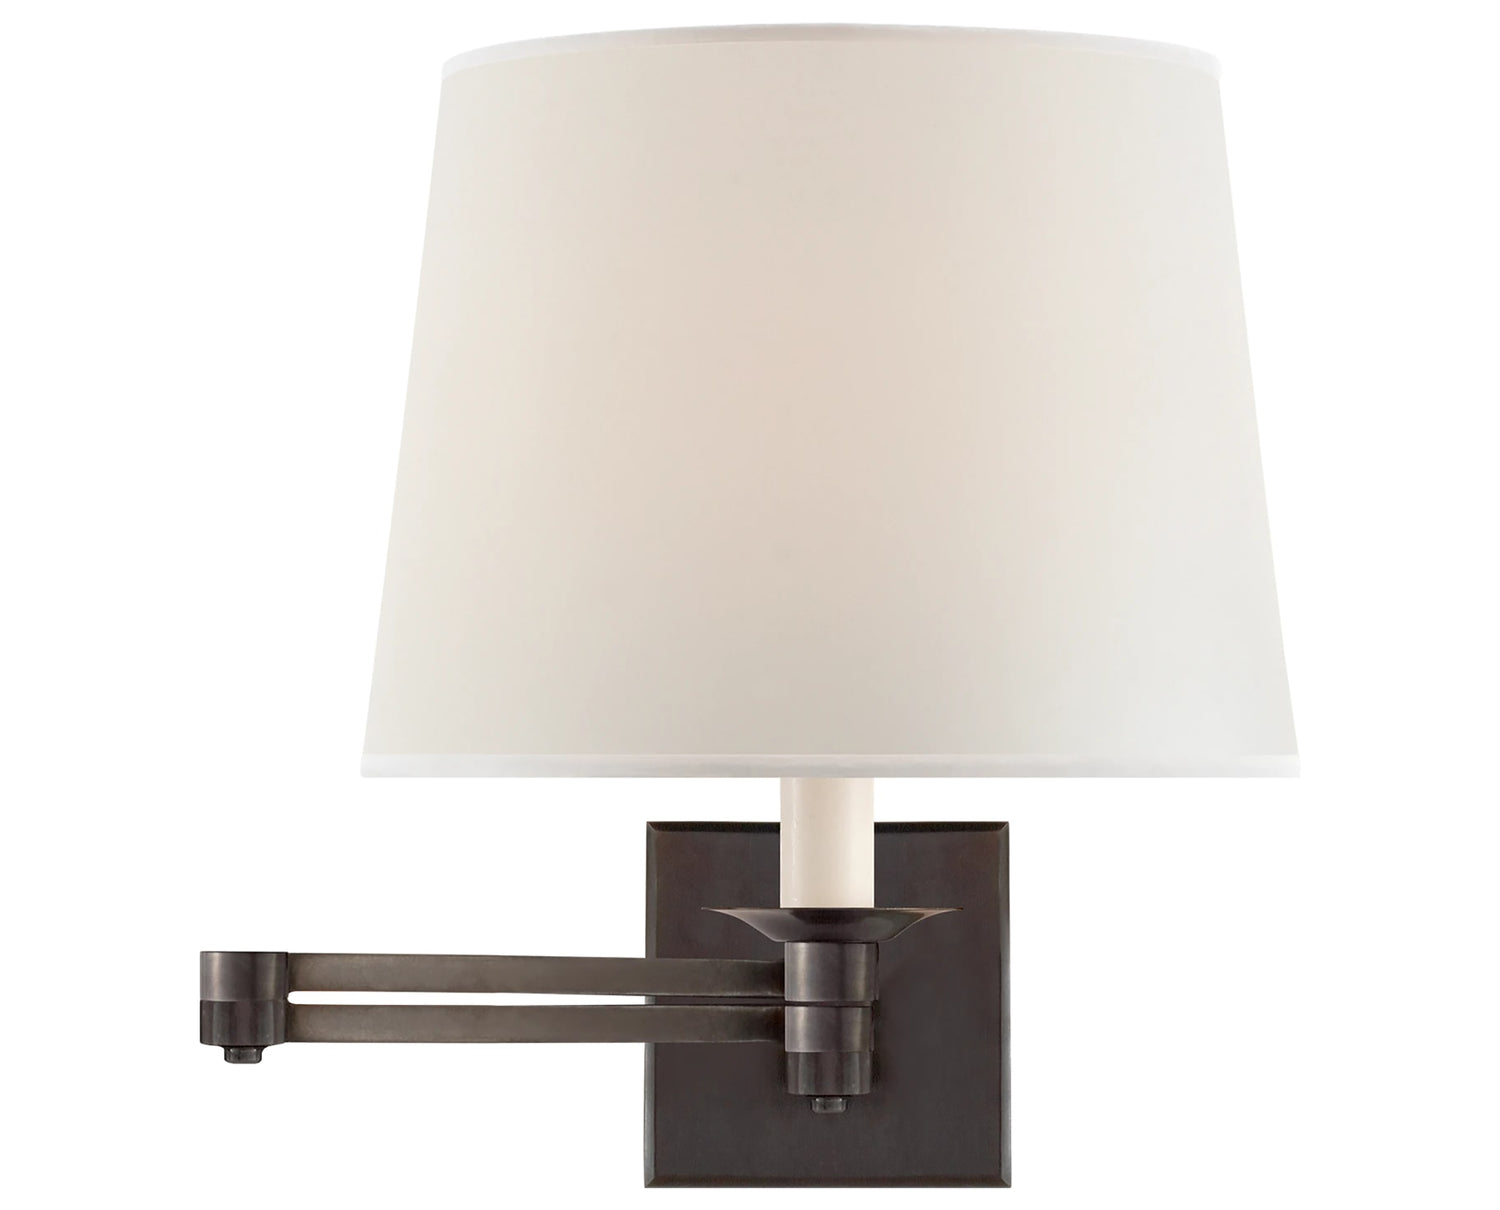 Bronze & Percale Nordy | Evans Swing Arm Sconce | Valley Ridge Furniture